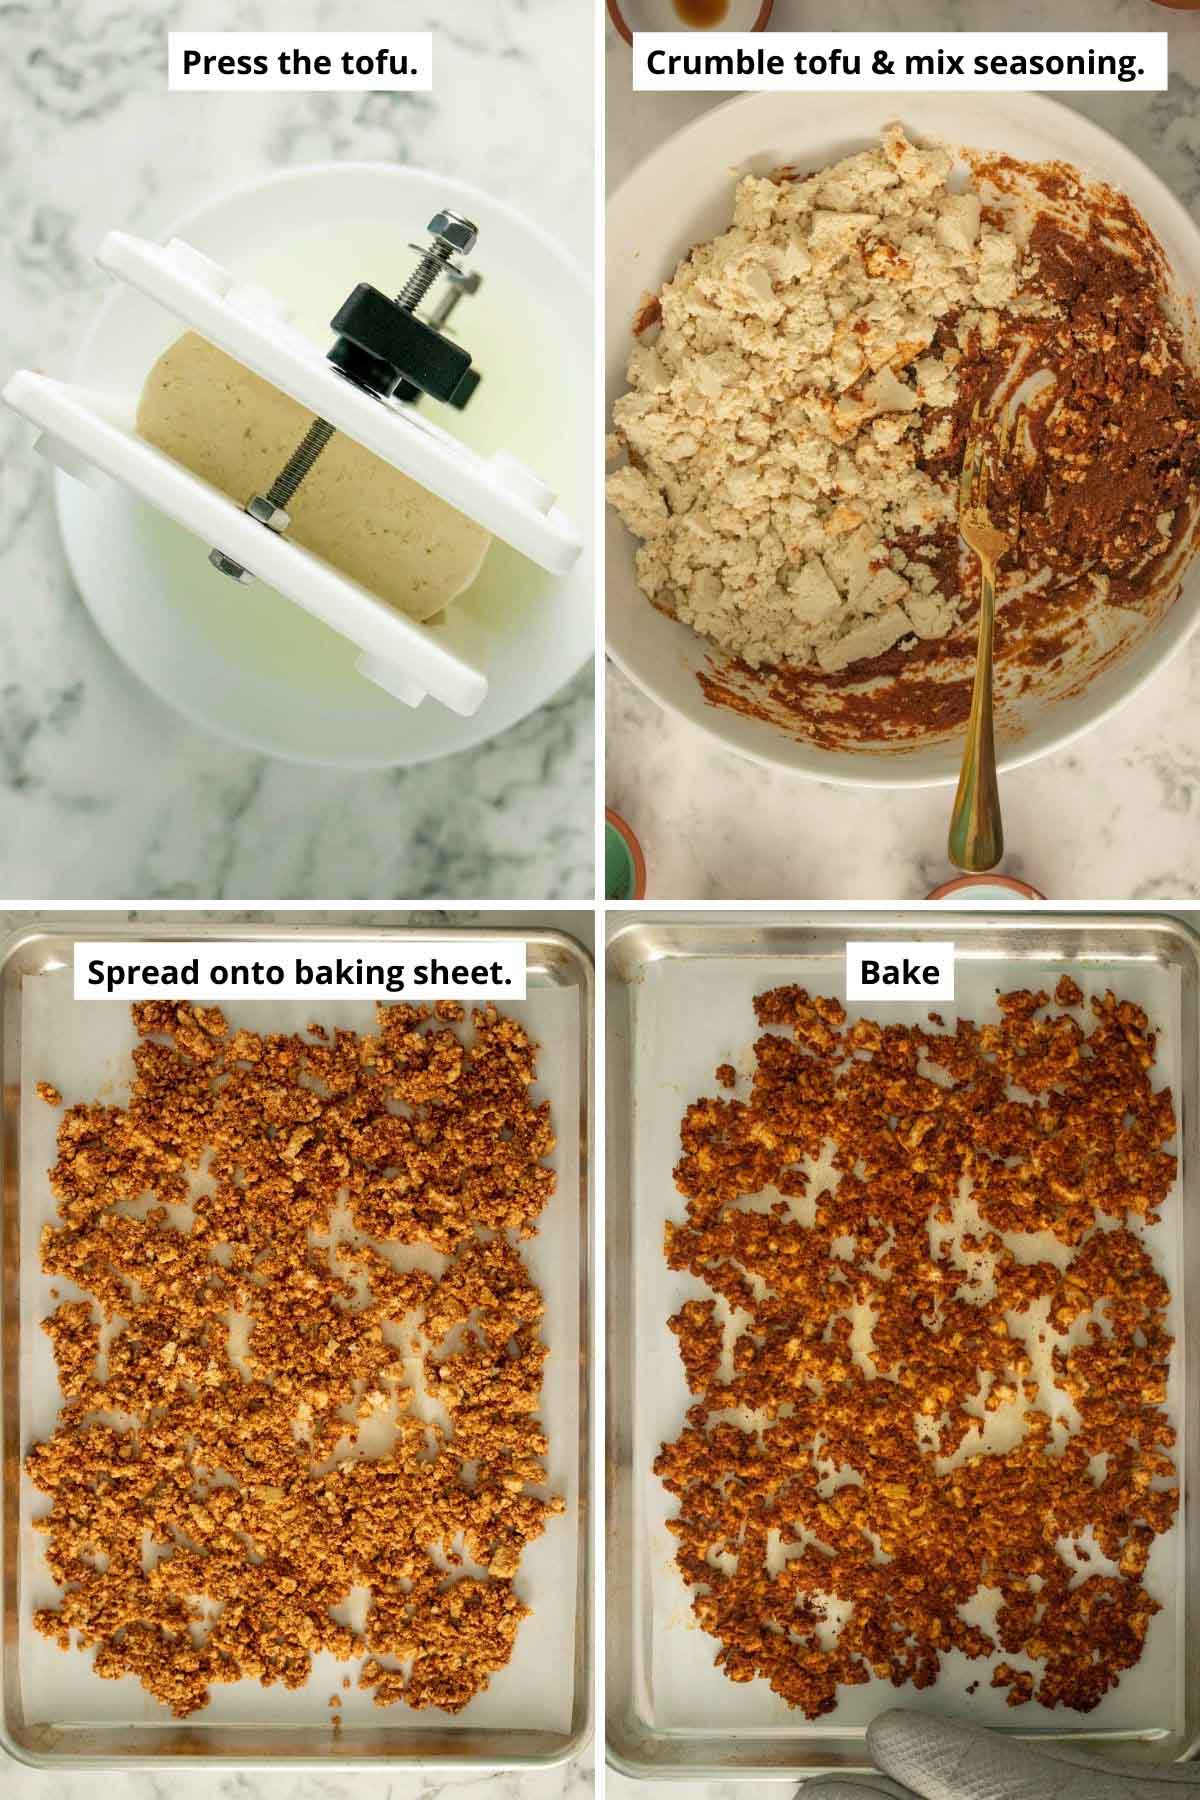 image collage showing pressing the tofu, the crumbled tofu and seasoning mix in a bowl, and the tofu on a baking sheet before and after baking